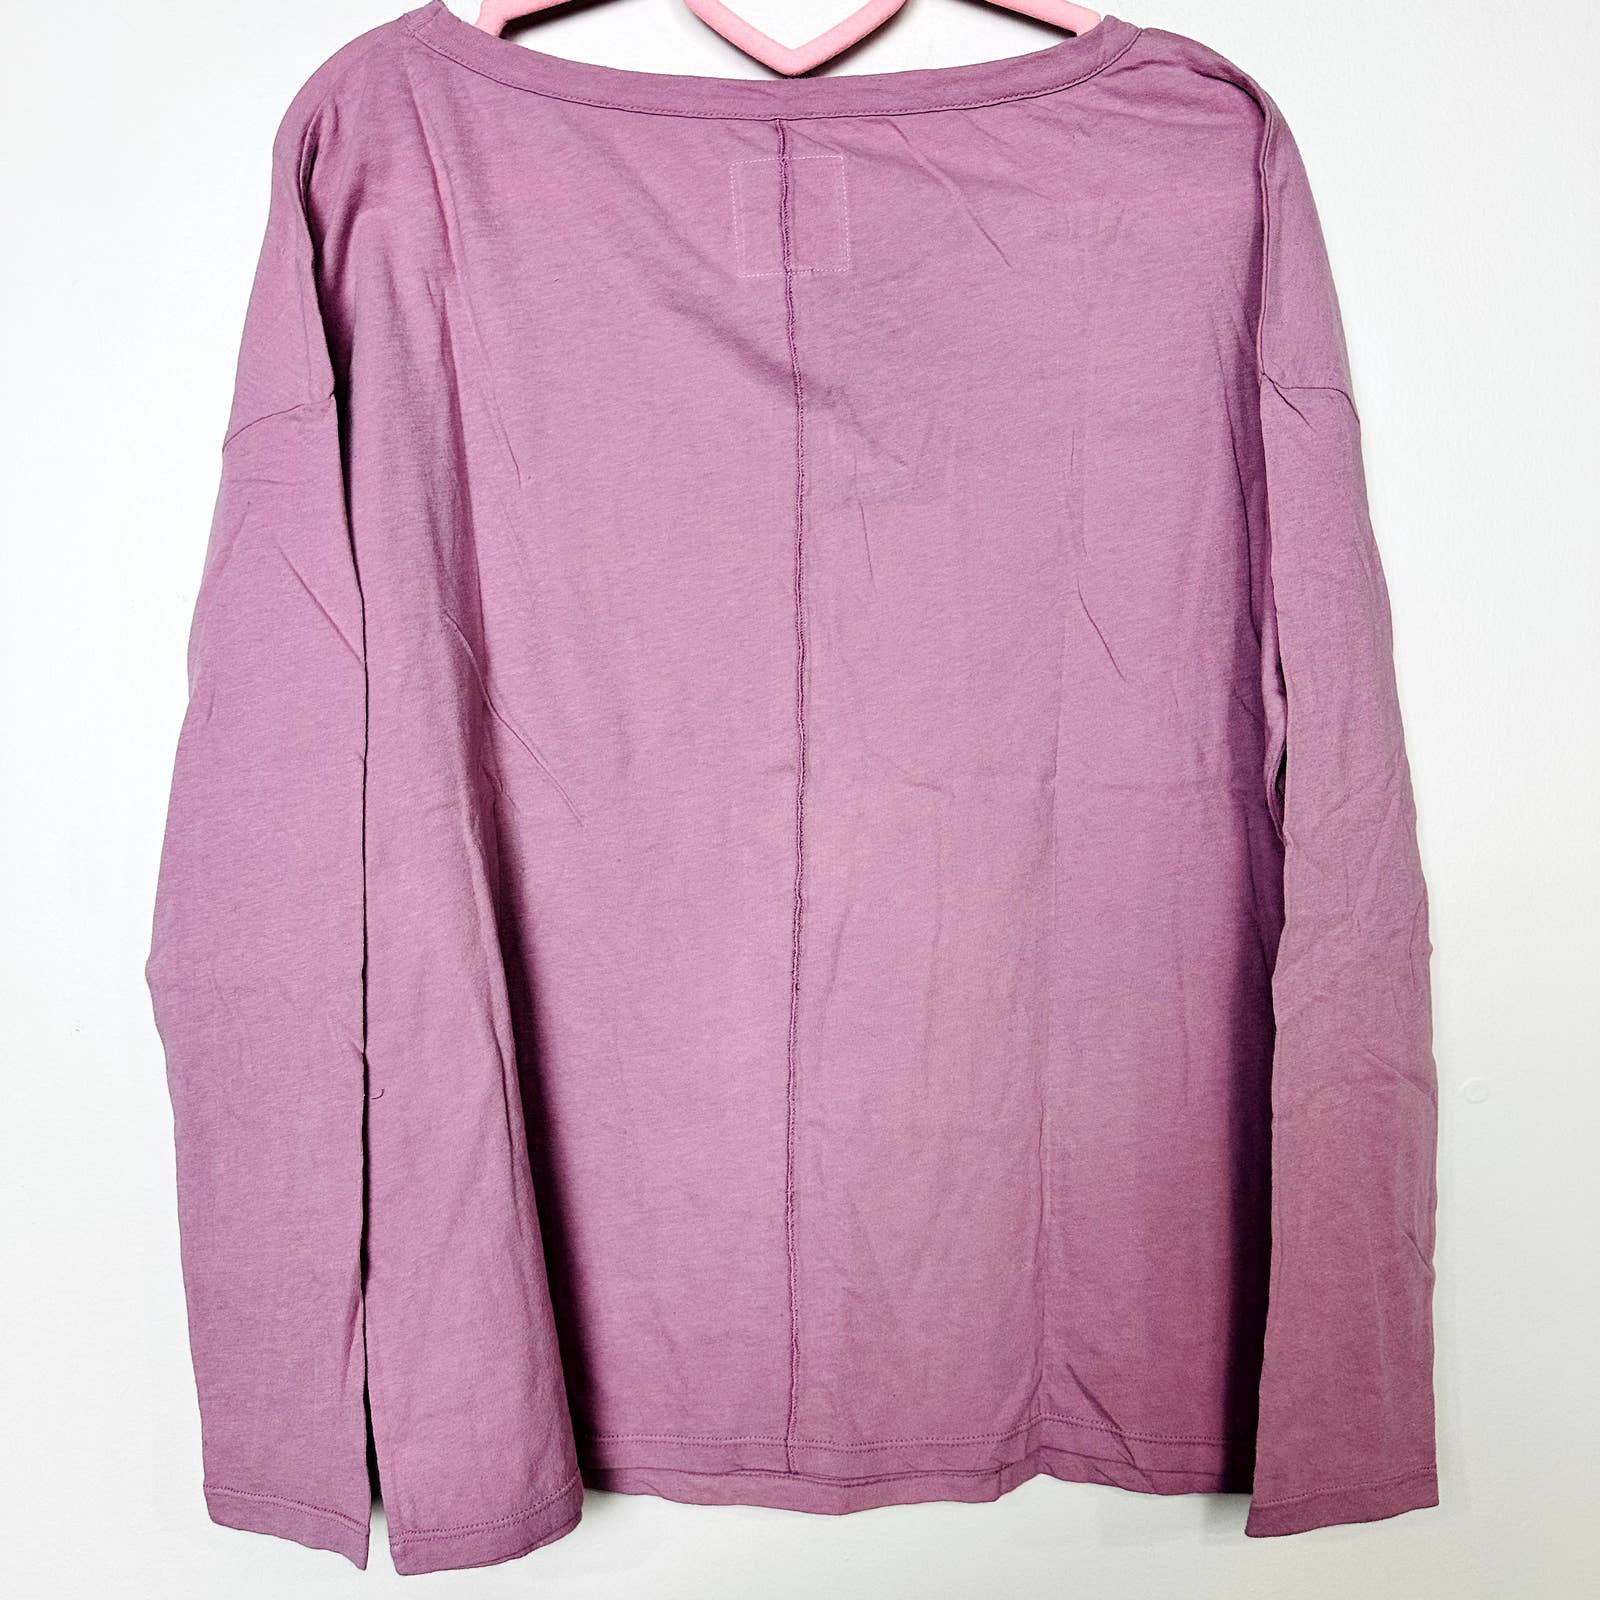 Chaser NWT Boat Neck Dolman Long Sleeve Casual Pullover Top Mauve Pink Sz Small